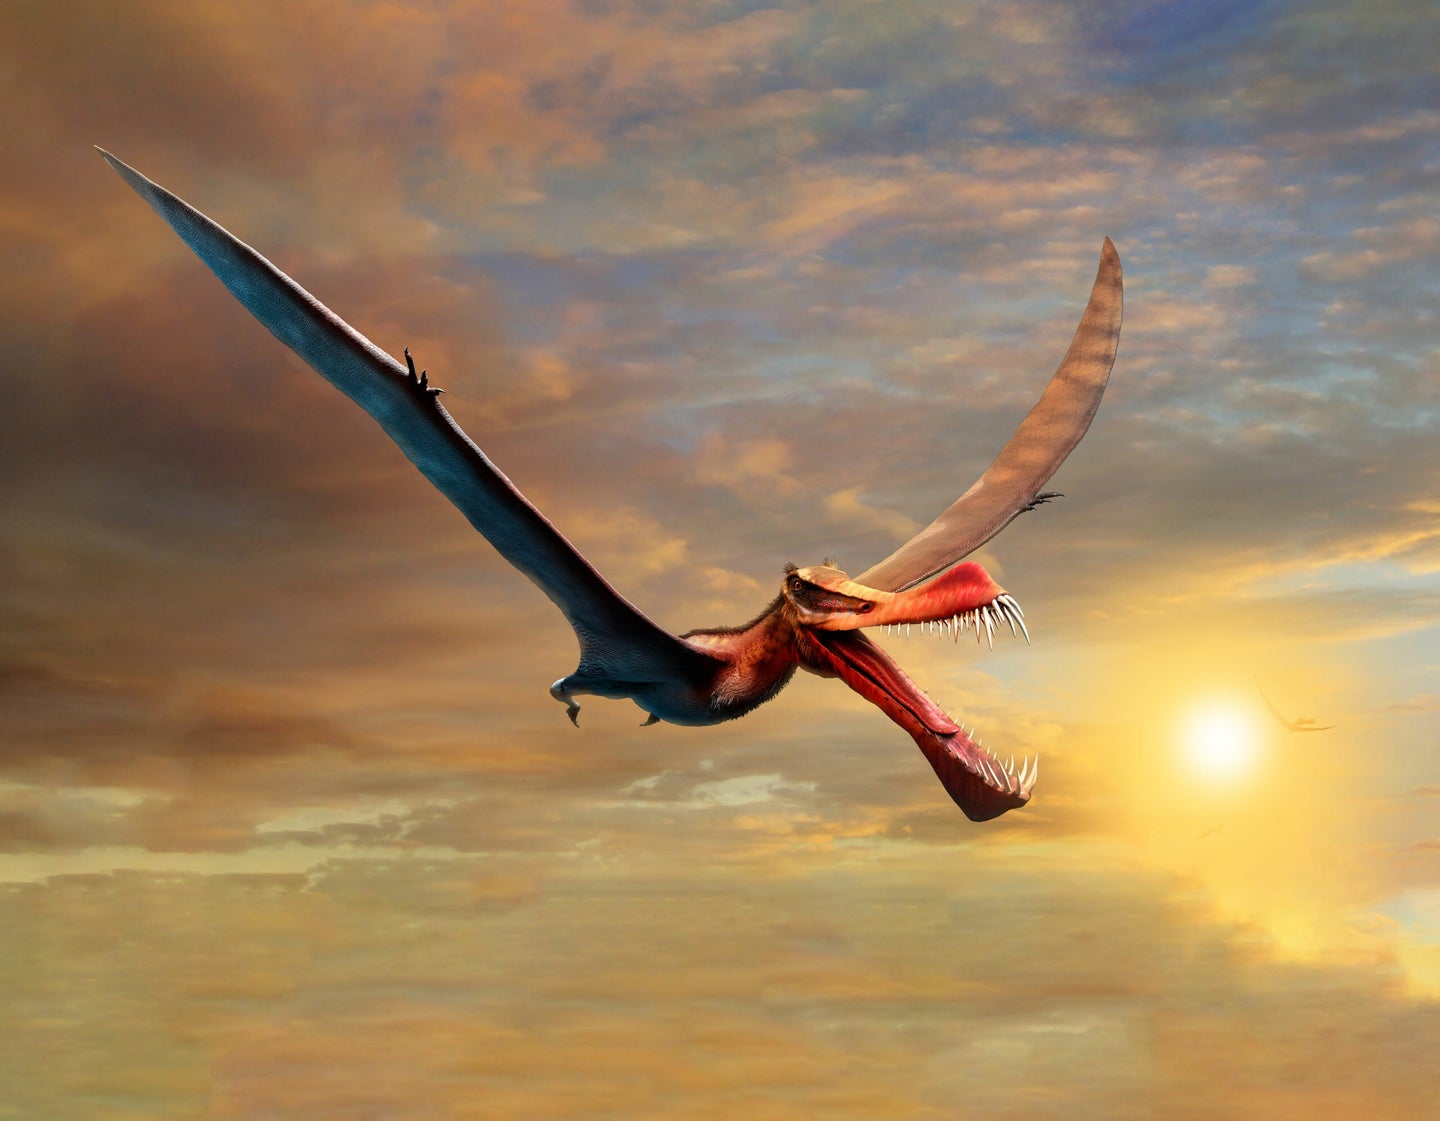 An artist's depiction of an extinct pterosaur, a flying reptile relative of dinosaurs.